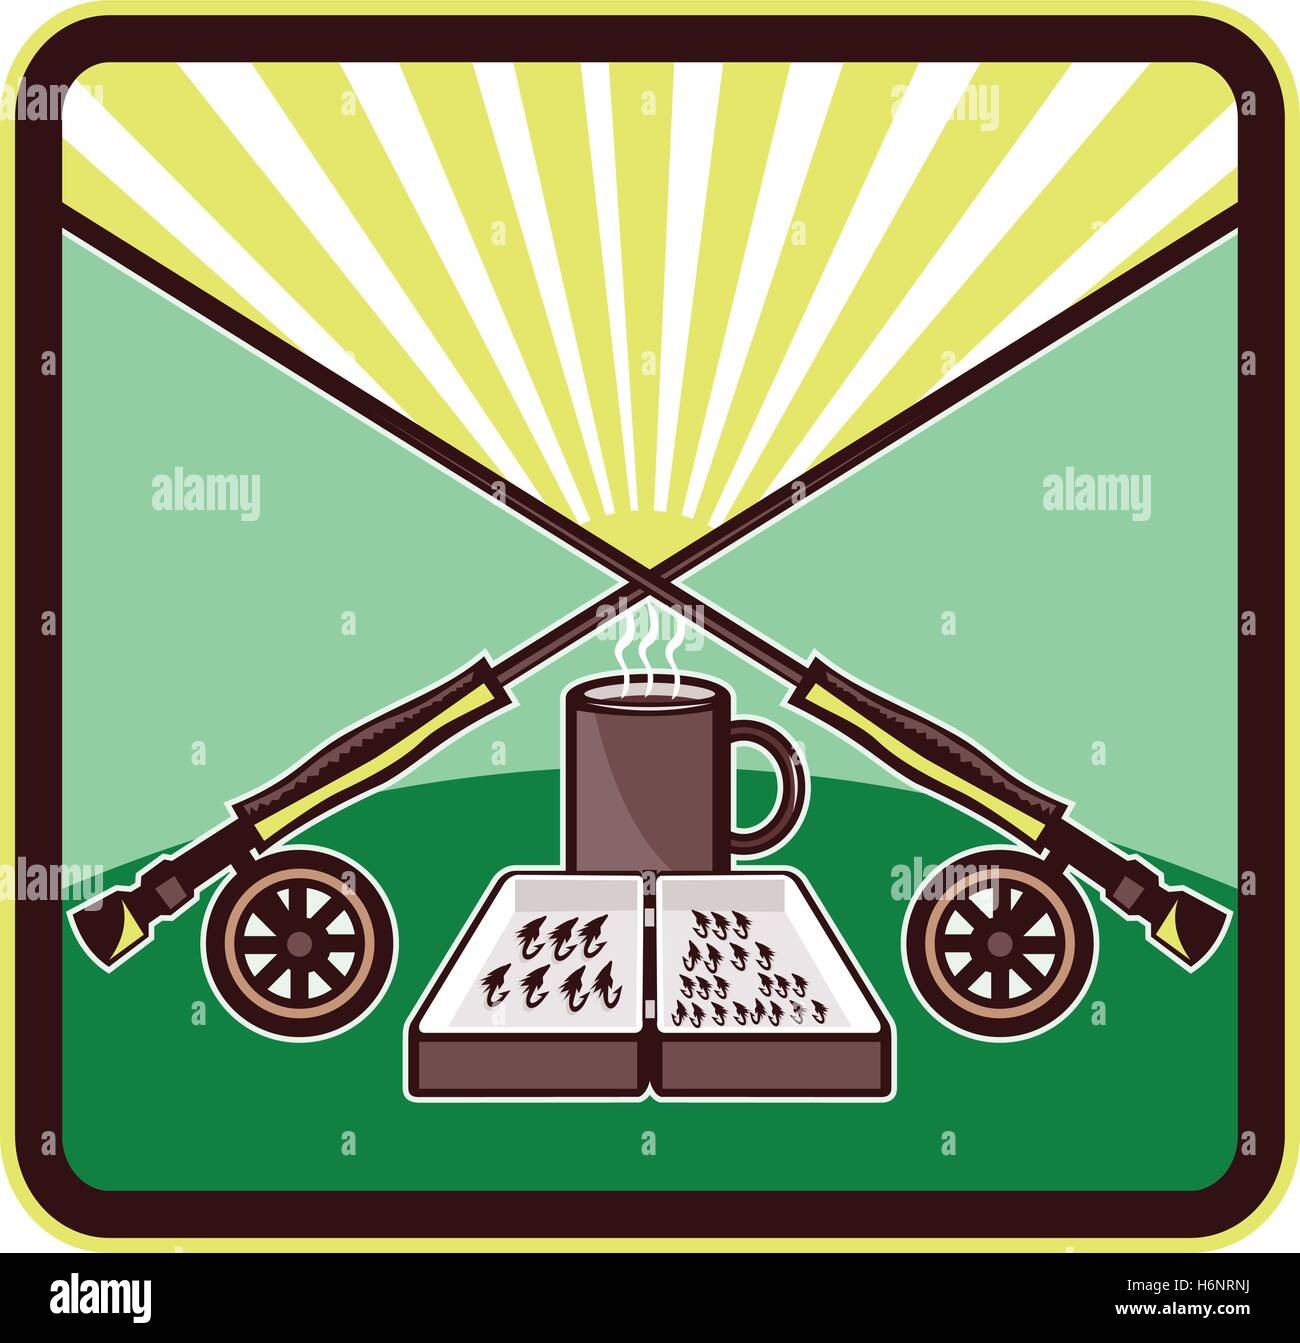 Illustration of a fly box, mug with crossed fly rods on wheels set inside rectangle shape with sunburst in the background done in retro style. Stock Vector